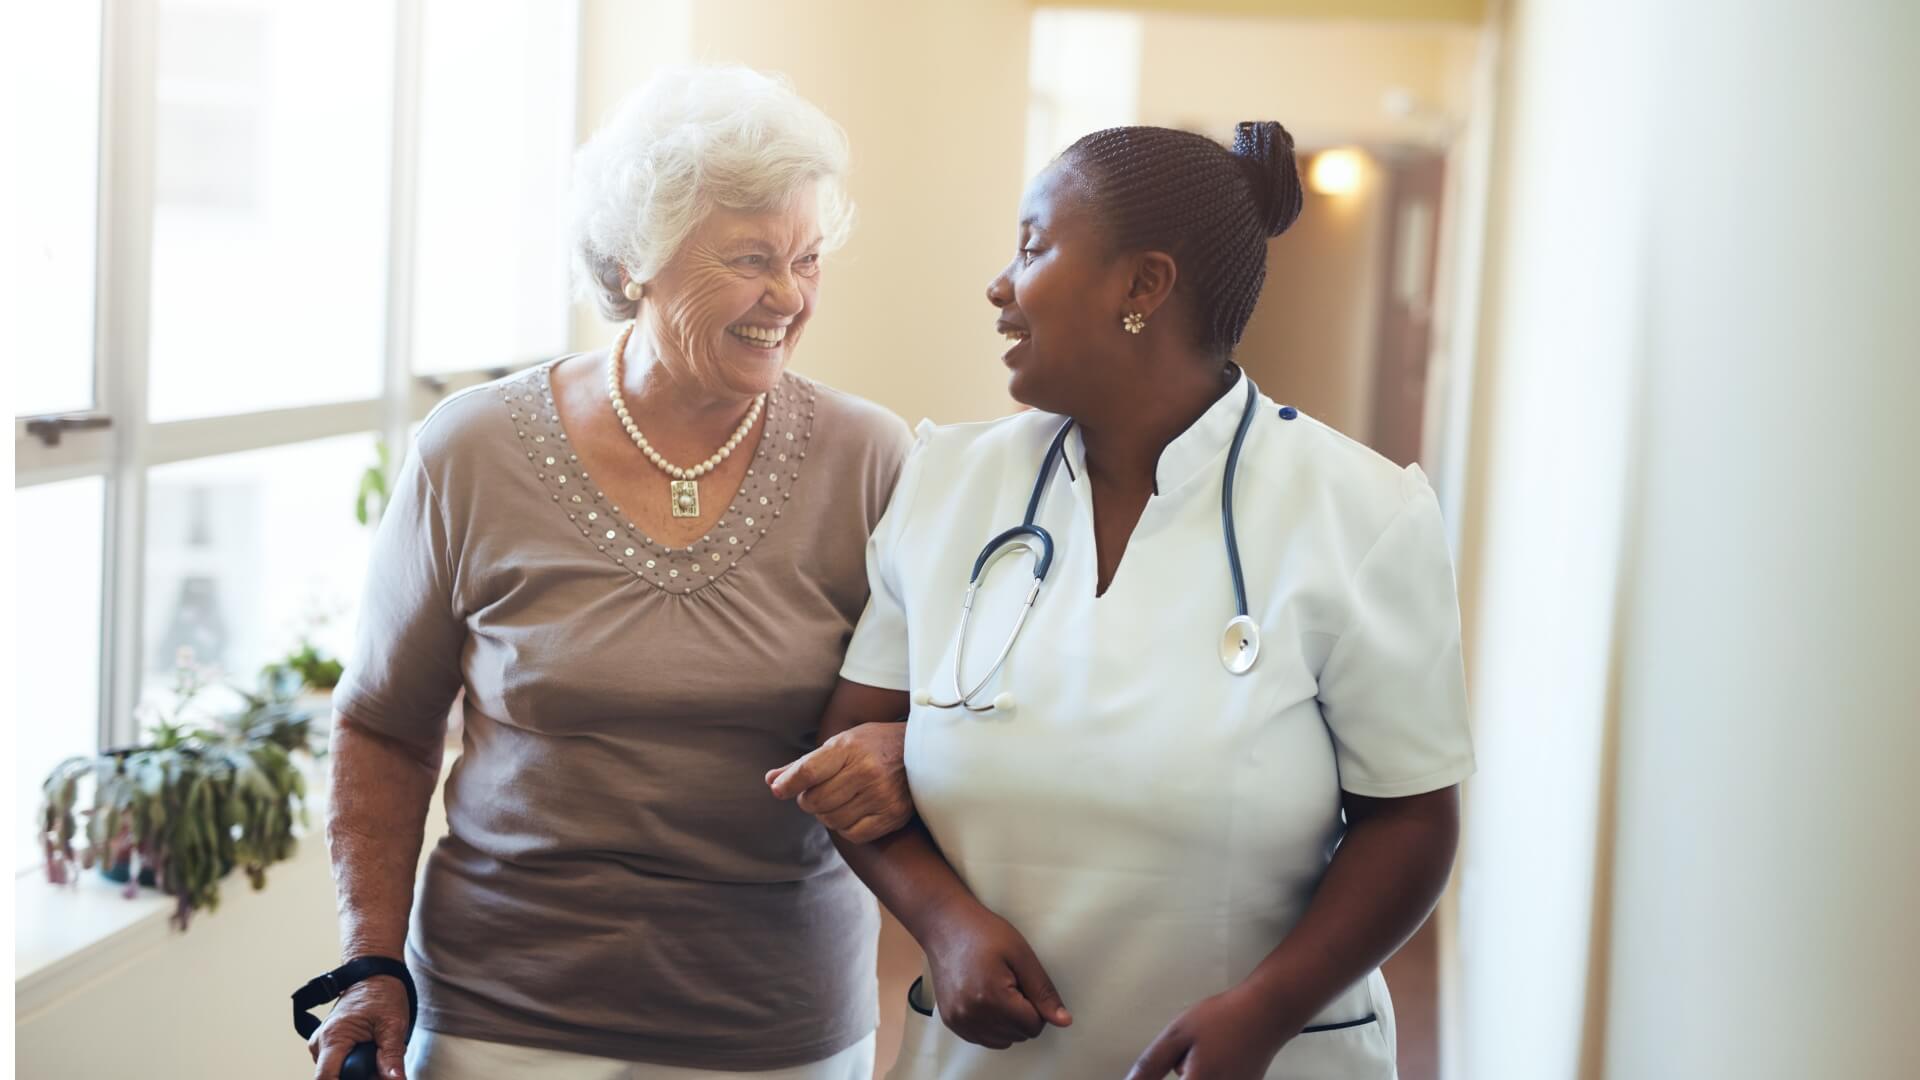 4 Ways to Tell if a Nursing Home is Right for Your Vulnerable Relative